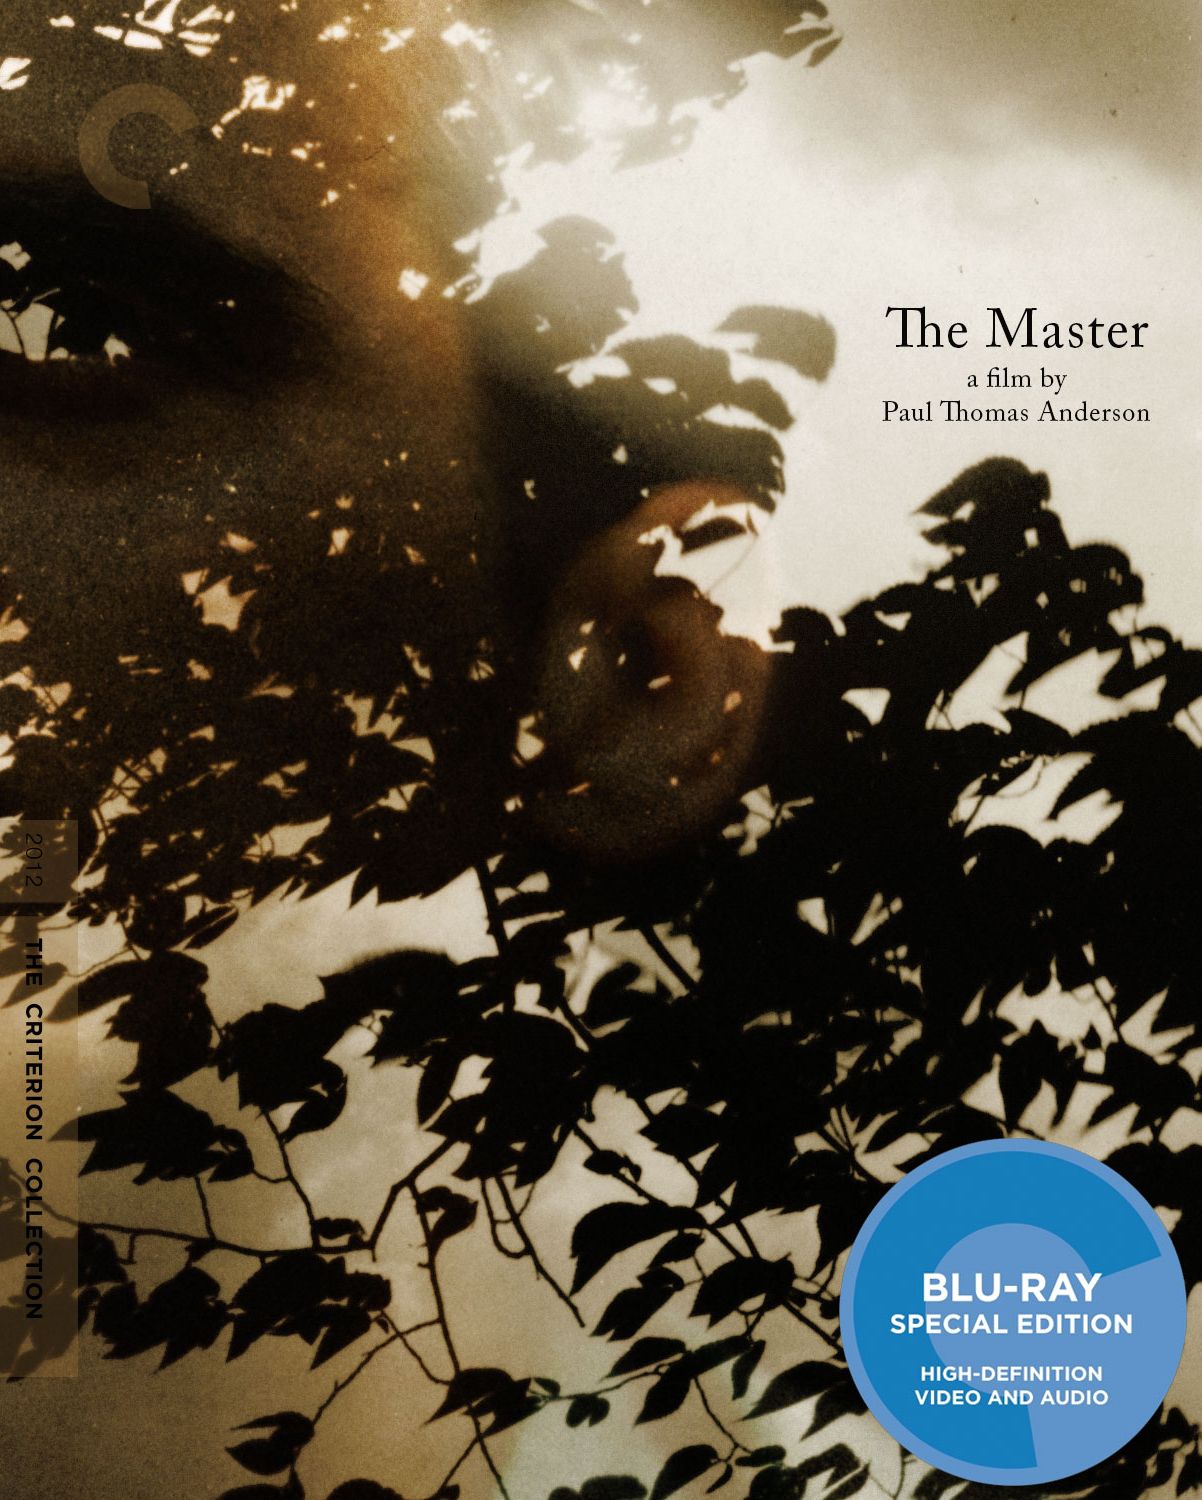 The Criterion Collection - The Master - Cover Design #4